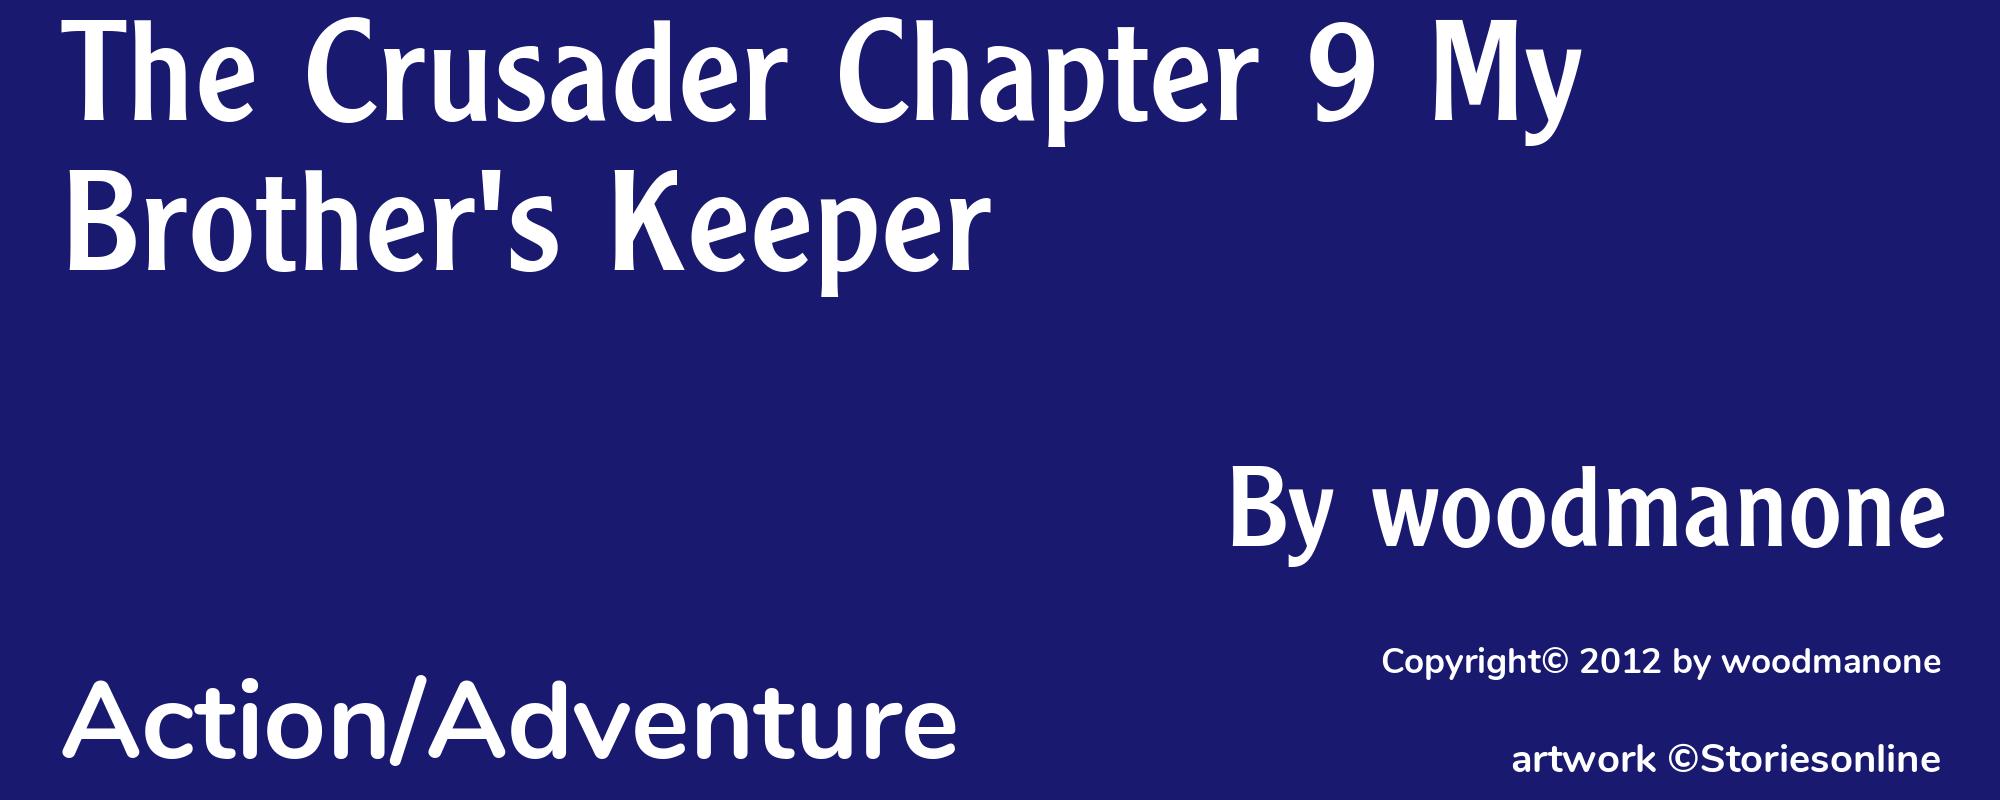 The Crusader Chapter 9 My Brother's Keeper - Cover